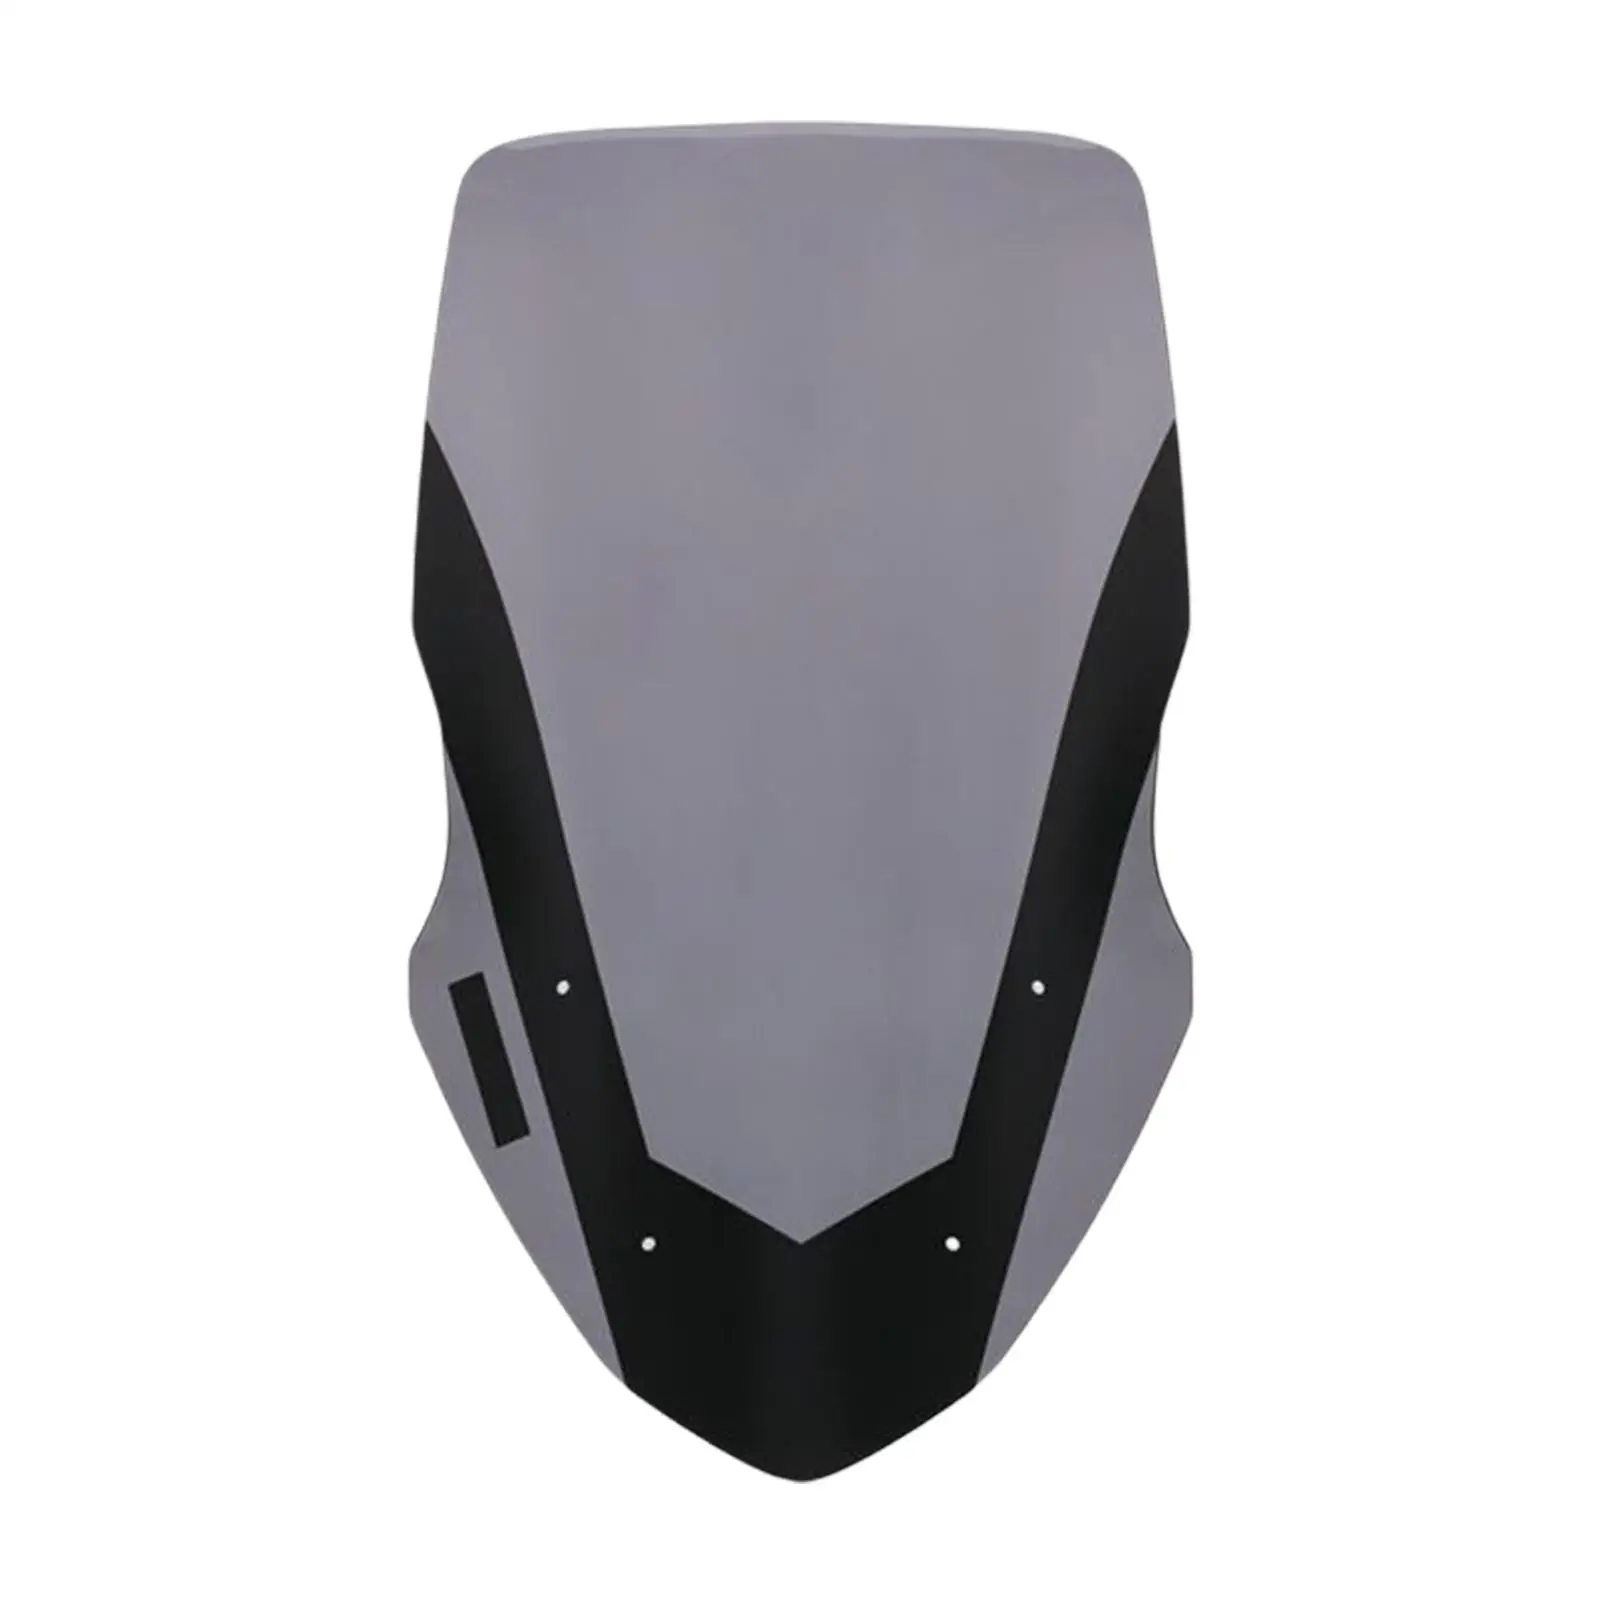 Motorcycle Windshield Front Fairing Windscreen for Yamaha Nmax155 Nmax125 16-18 Accessories Spare Parts Professional